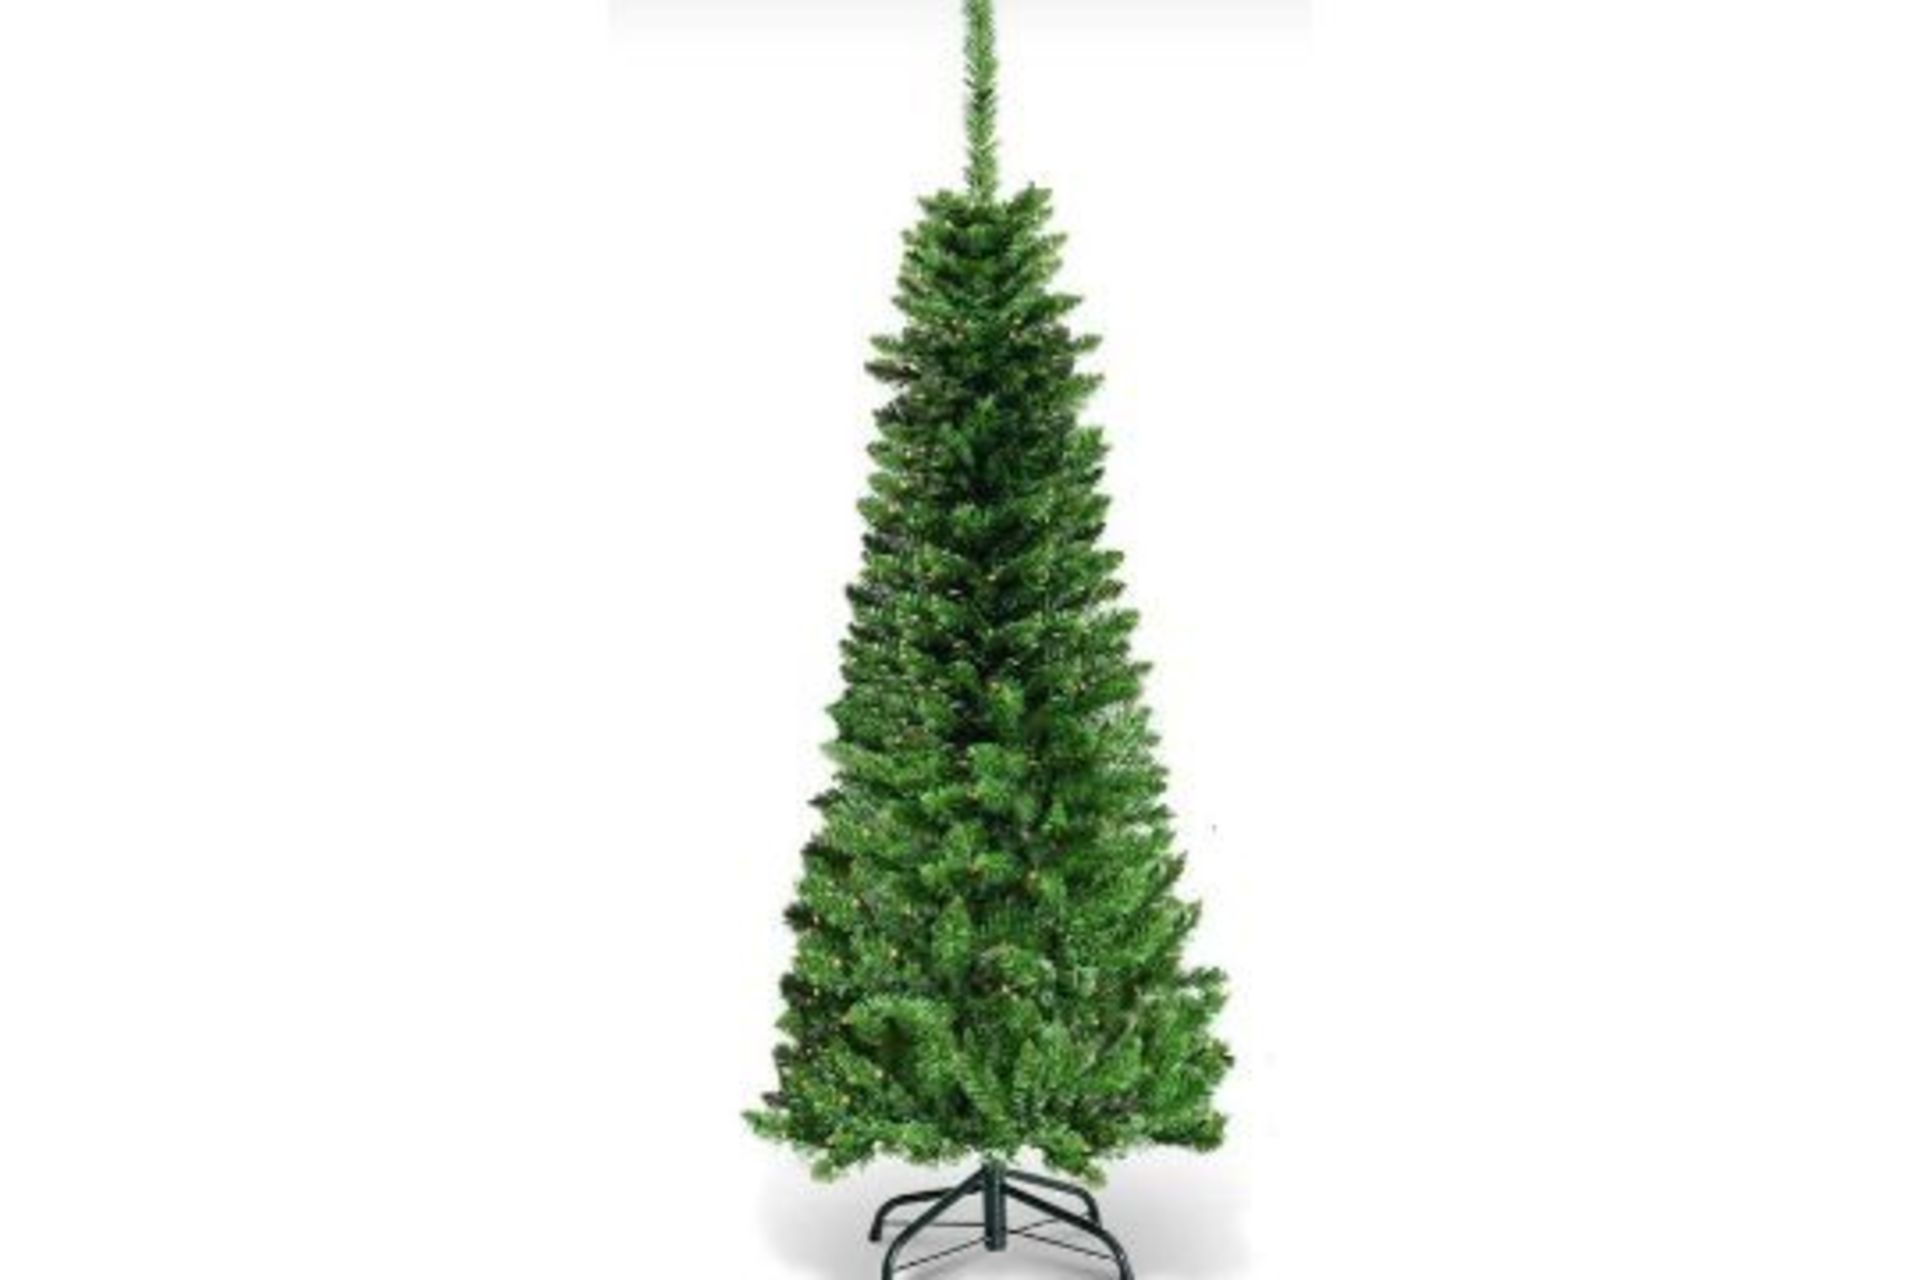 2 x ARTIFICIAL PENCIL CHRISTMAS TREE WITH LED LIGHTS . - R14.2. With pre-installed warm white LED